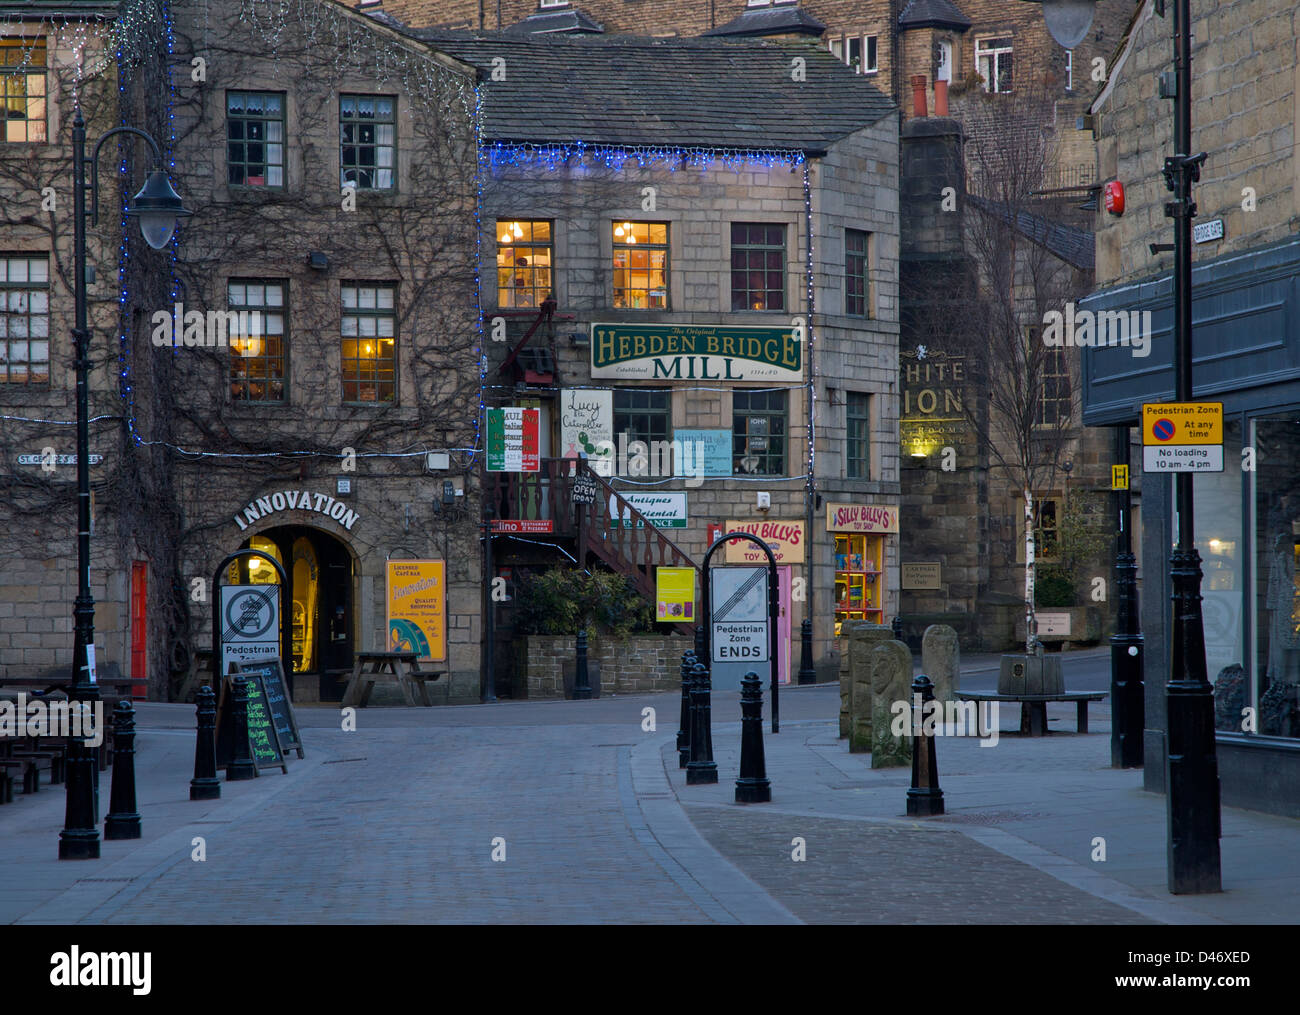 Shops bordering St George's Square in the town of Hebden Bridge, West Yorkshire, England UK Stock Photo